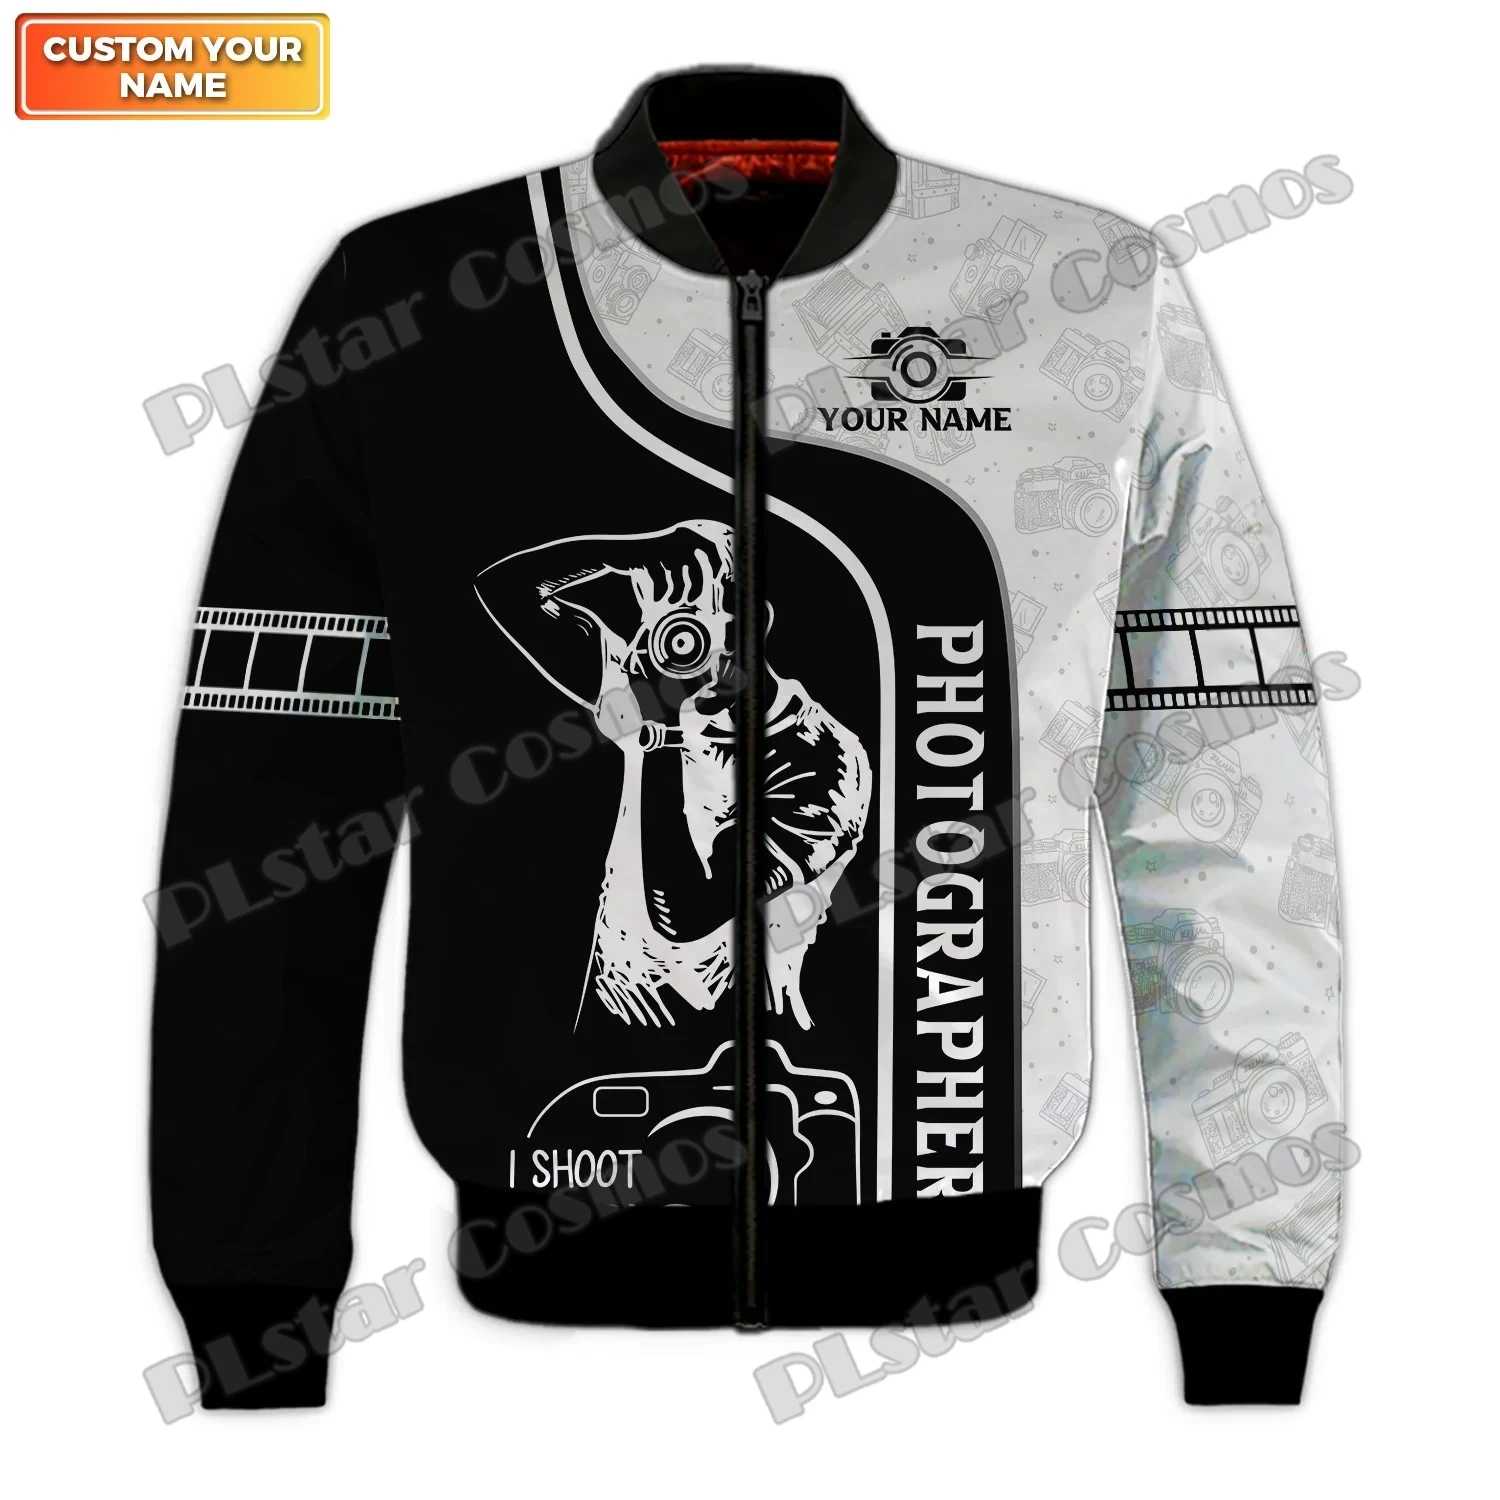 Videographer Custom Camera Tools 3D All Over Printed Men's Bomber Jackets Winter Unisex Casual warm thick Zipper Jacket FXU07 custom you name baking apron custom baker uniform 3d all over printed apron